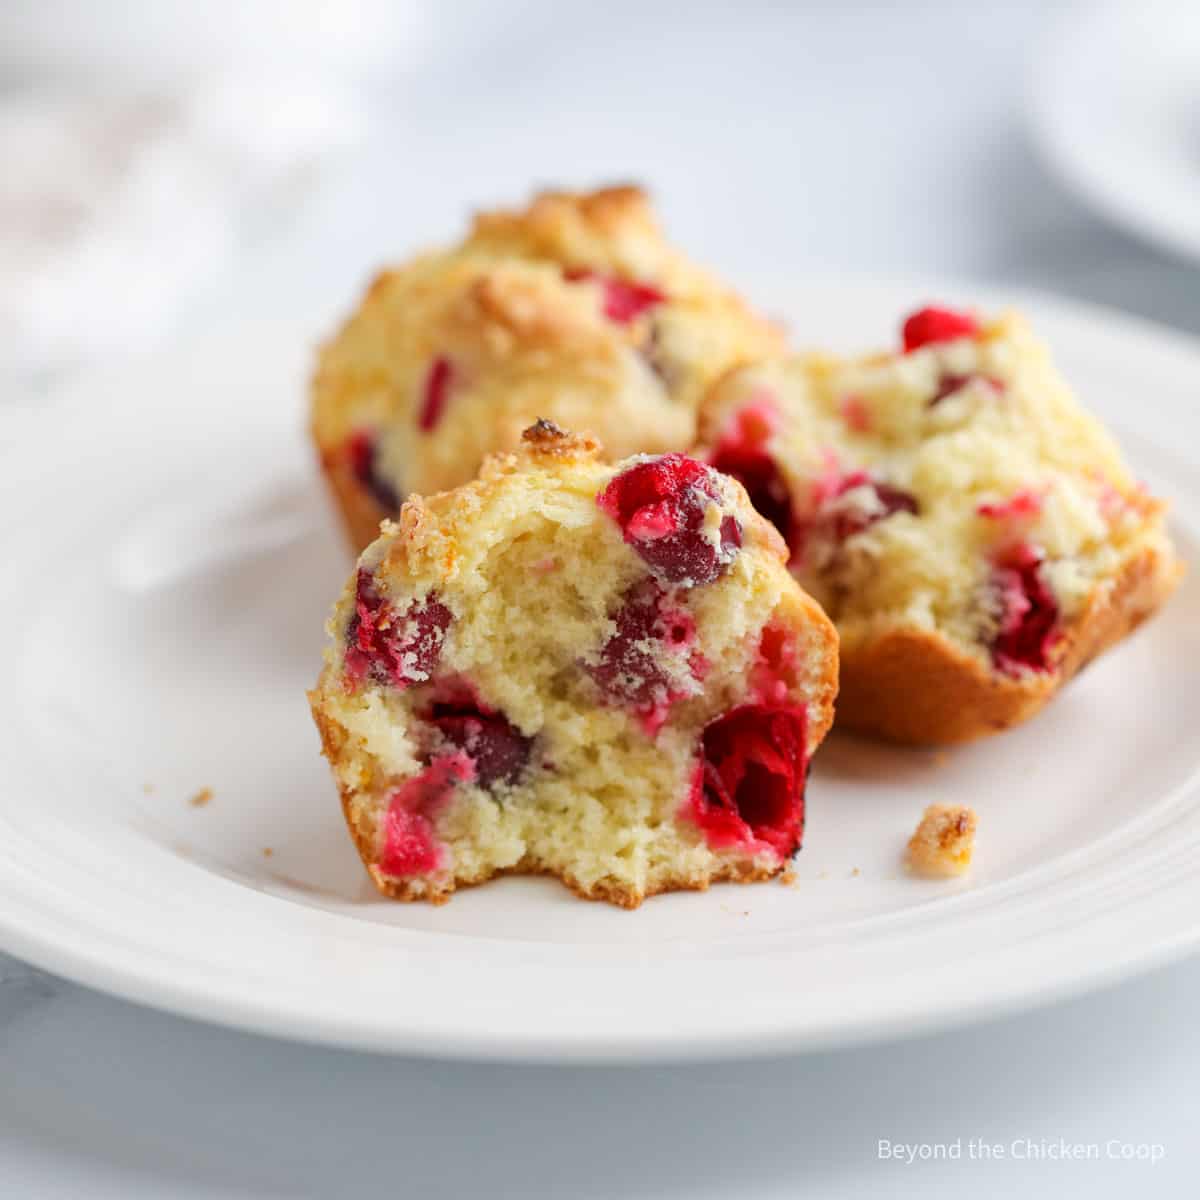 A half of a muffin filled with cranberries on a plate.